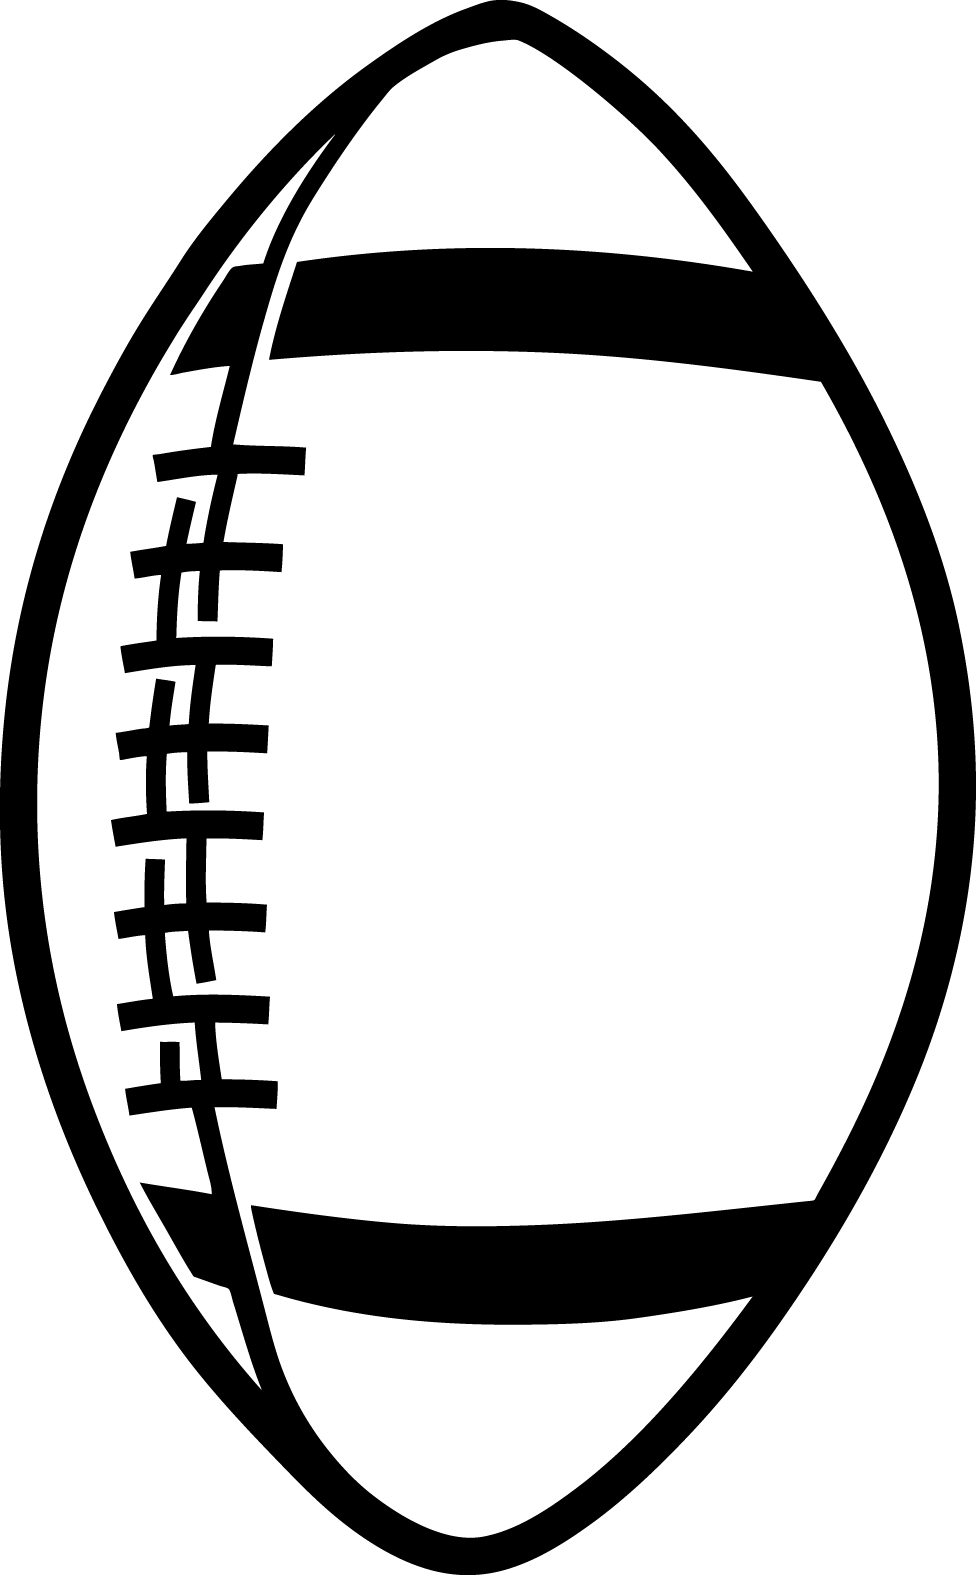 Black and White Football Logo - Football clip black and white download white - RR collections